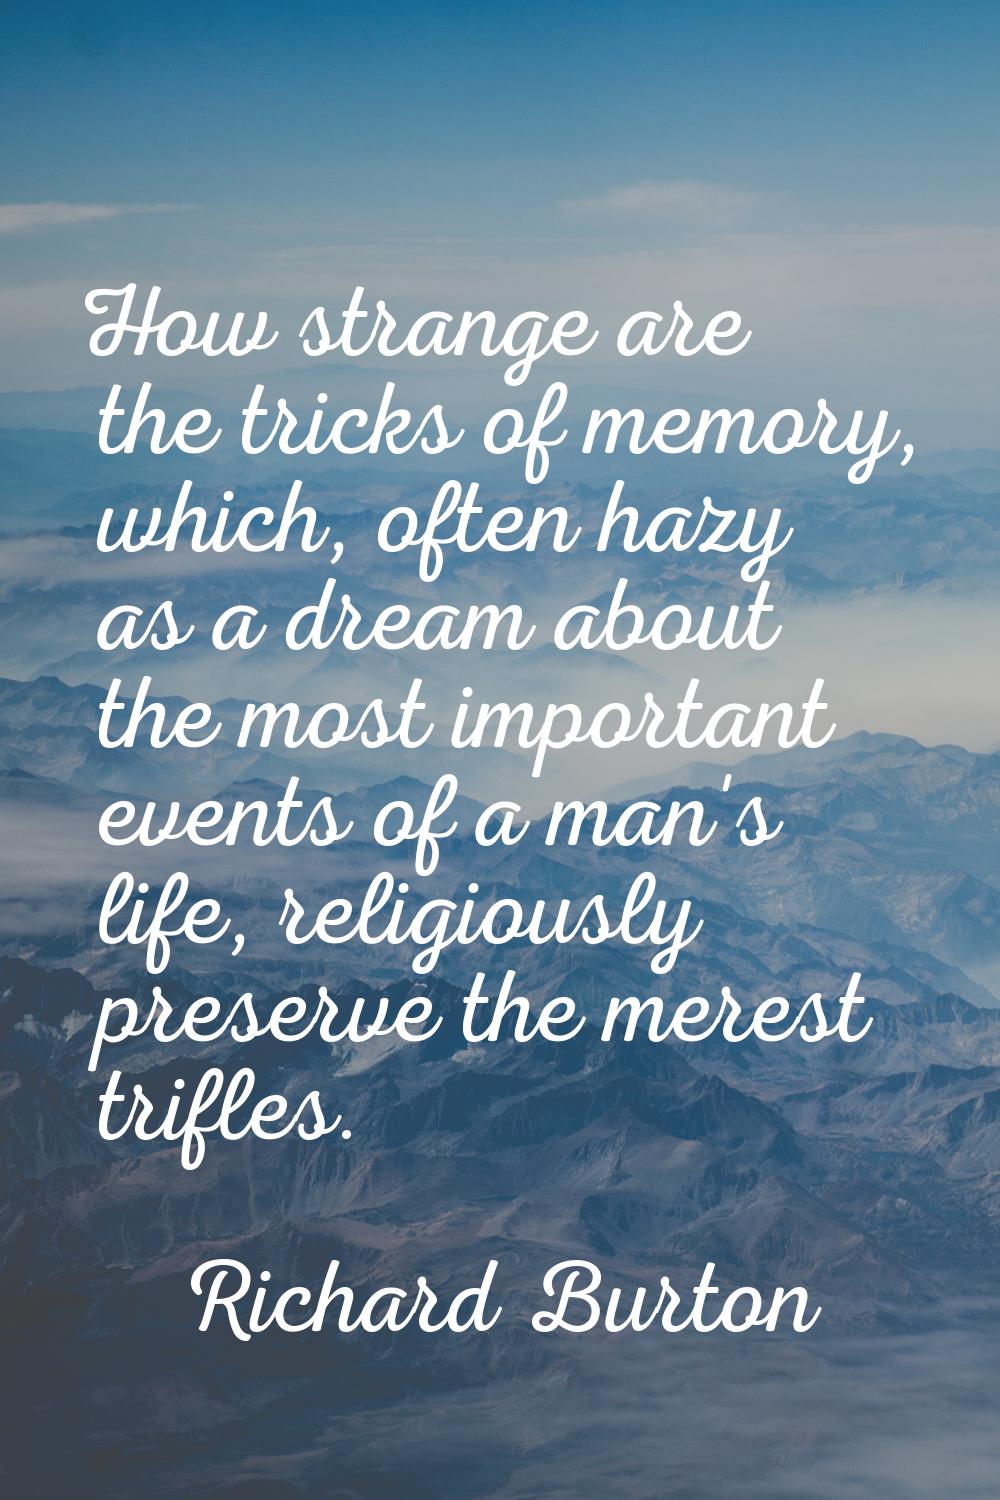 How strange are the tricks of memory, which, often hazy as a dream about the most important events 